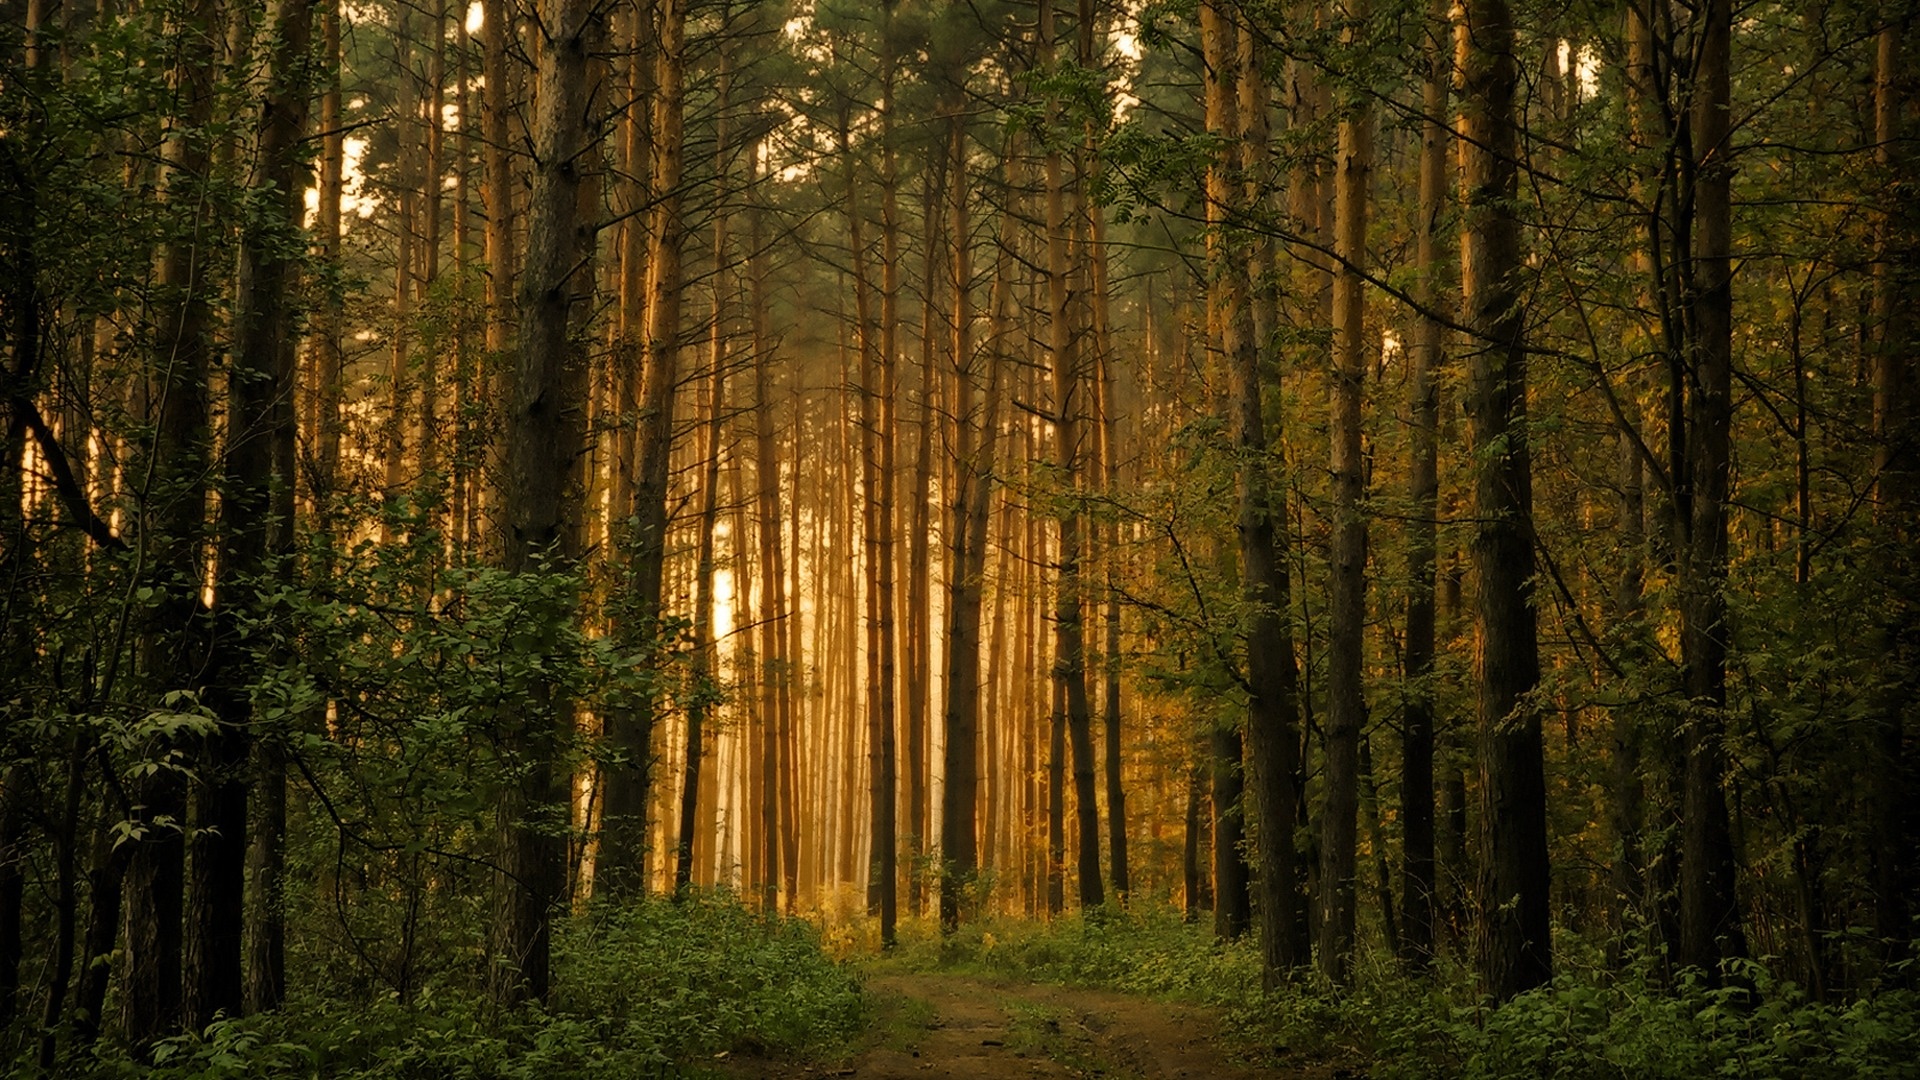 Replanting A “Forest of Interbeing”: Spiritual Community As Food